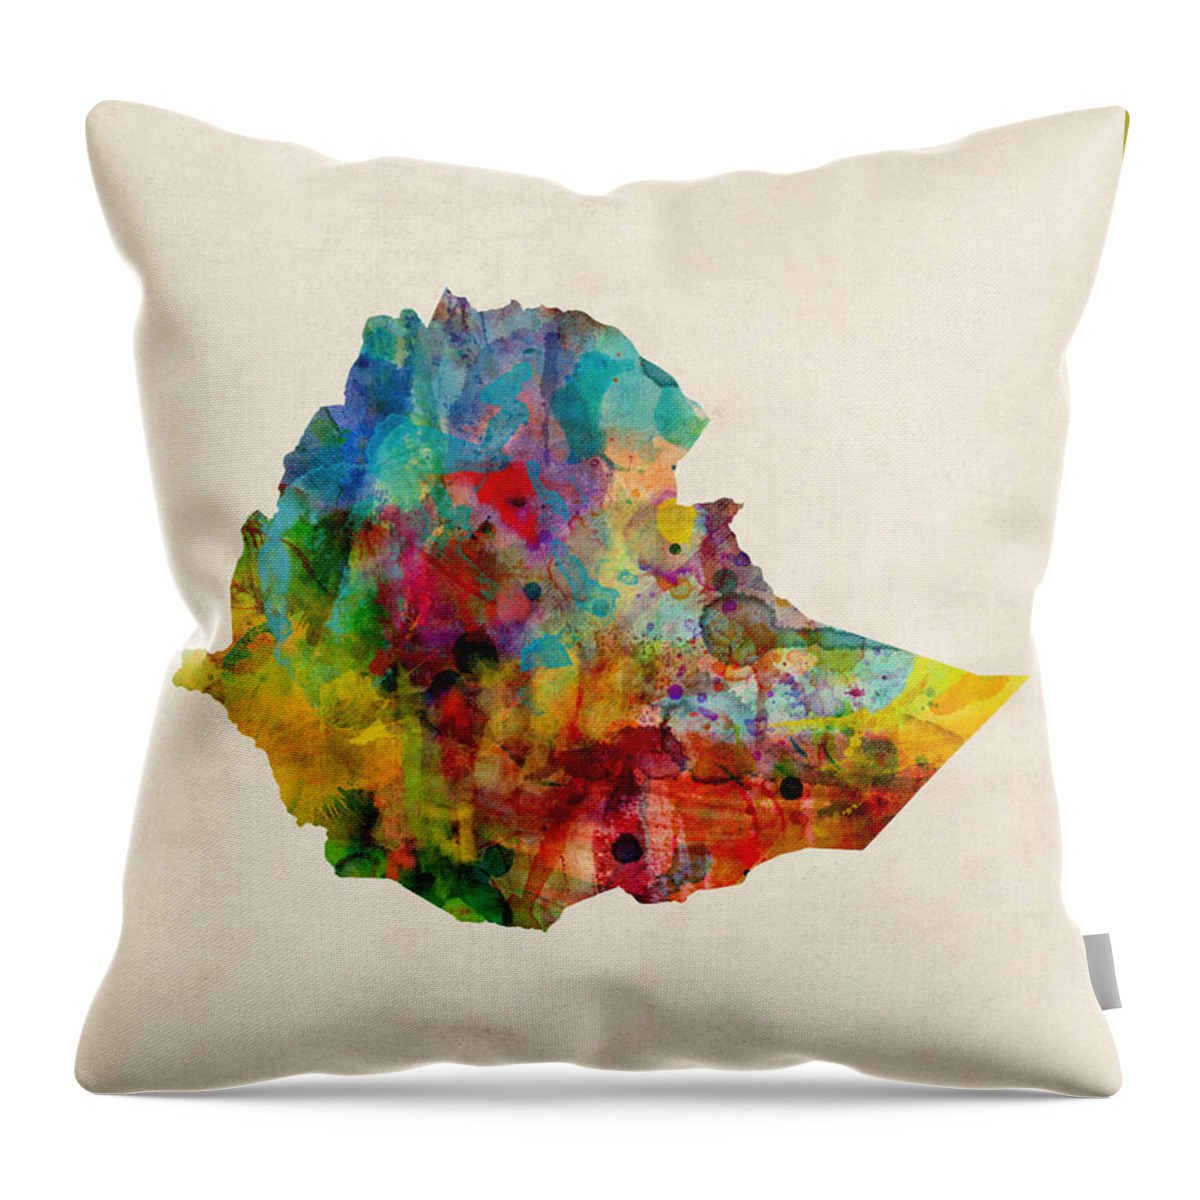 Ethiopia Throw Pillow featuring the digital art Ethiopia Watercolor Map by Michael Tompsett